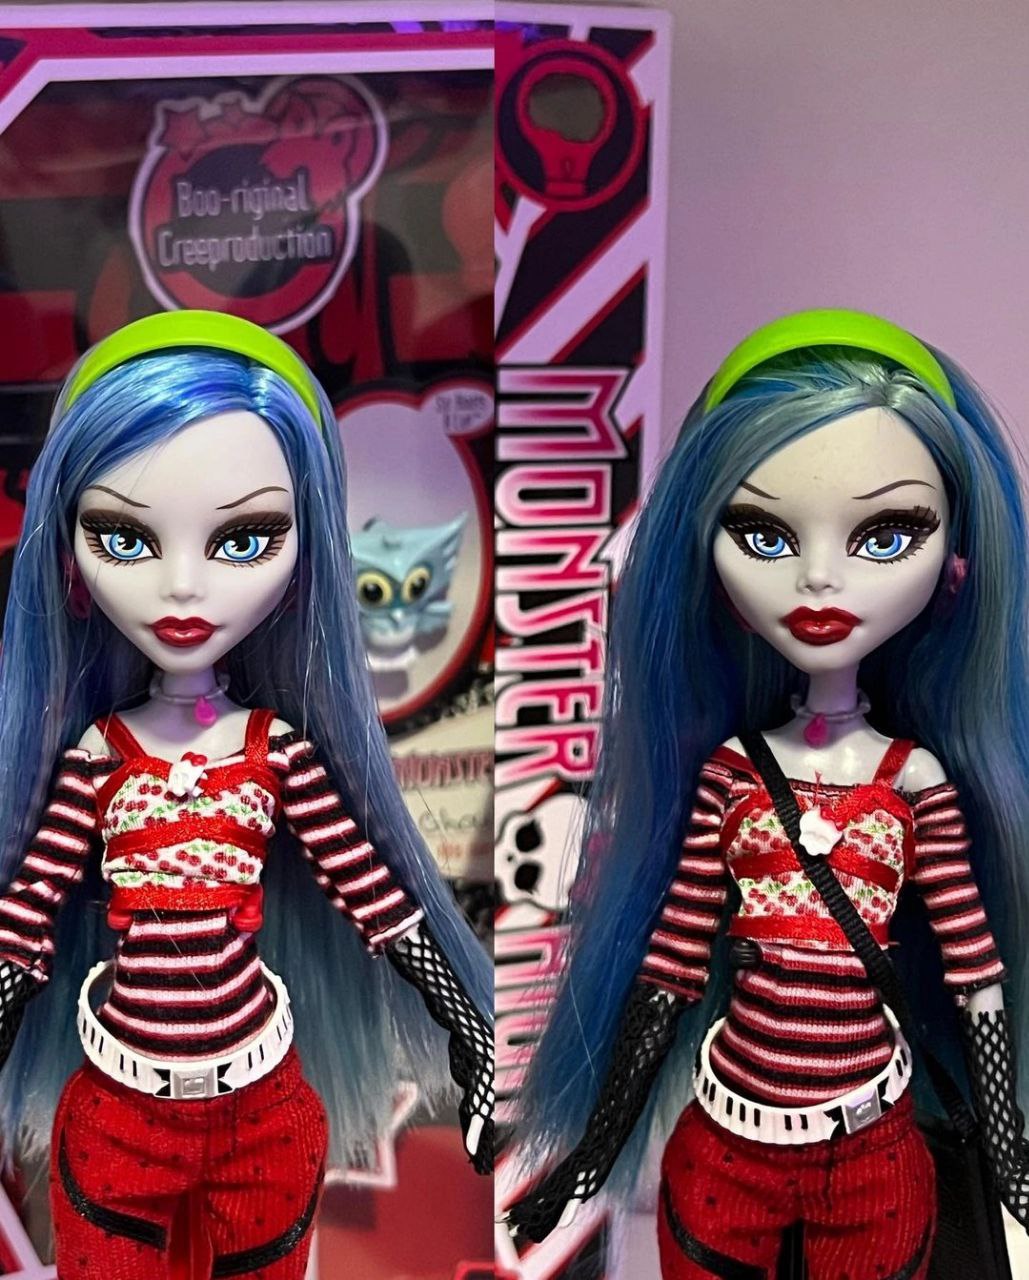 Monster High Creeproduction Ghoulia Yelps doll - reproduction of the ...